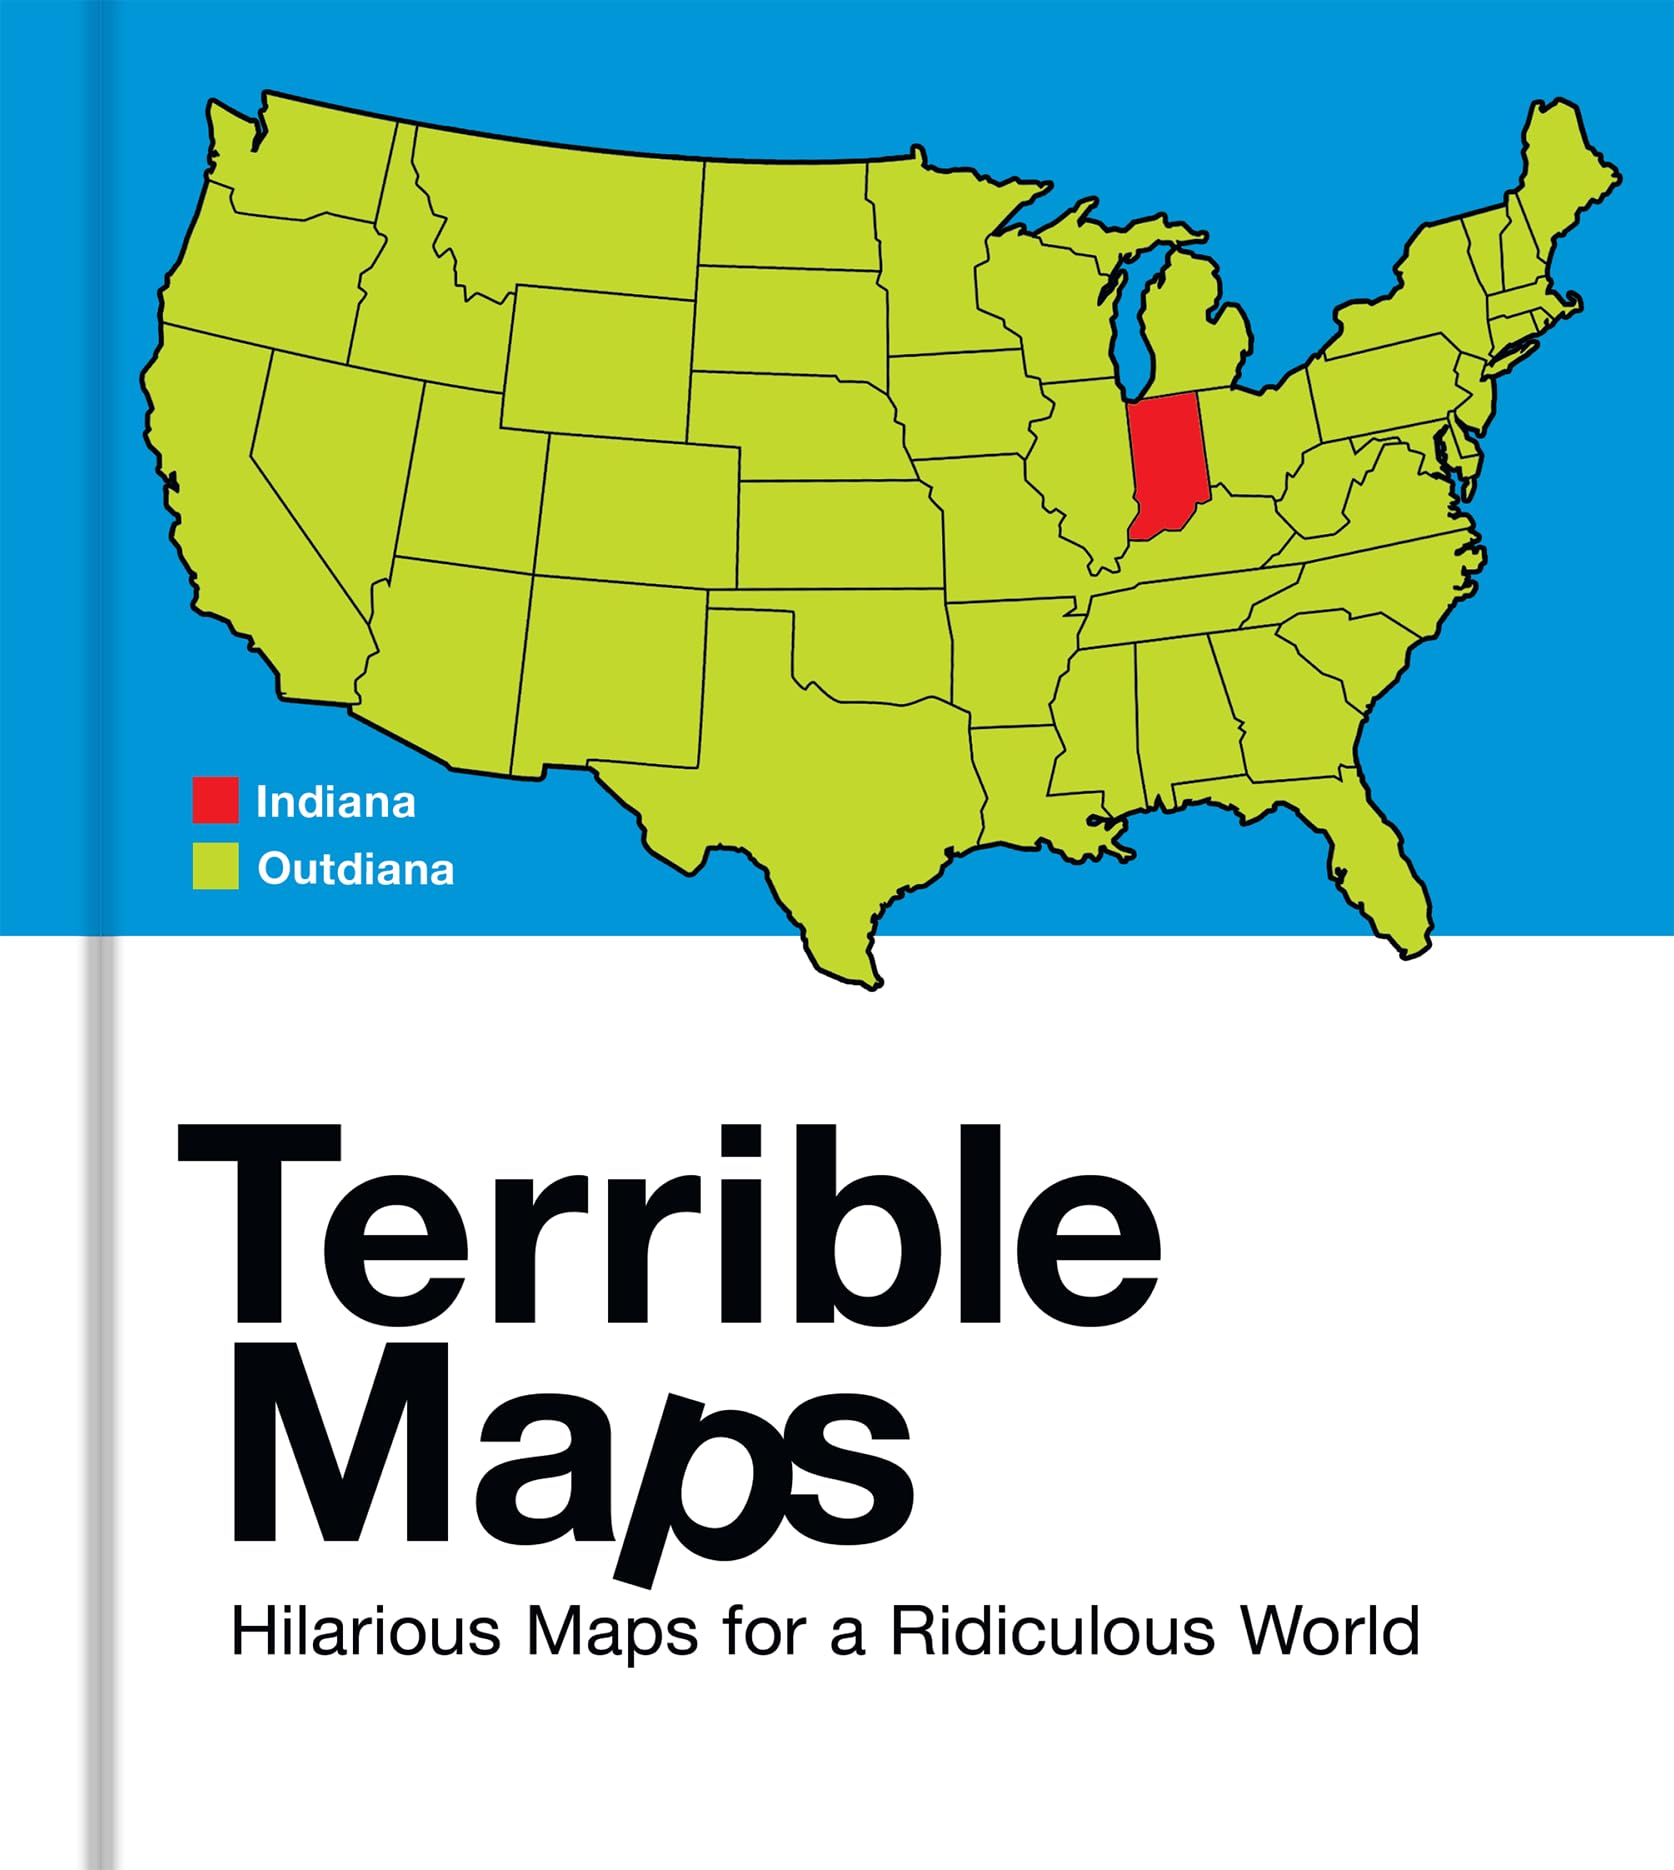 Terrible Maps: Hilarious Maps for a Ridiculous World by Howe, Michael